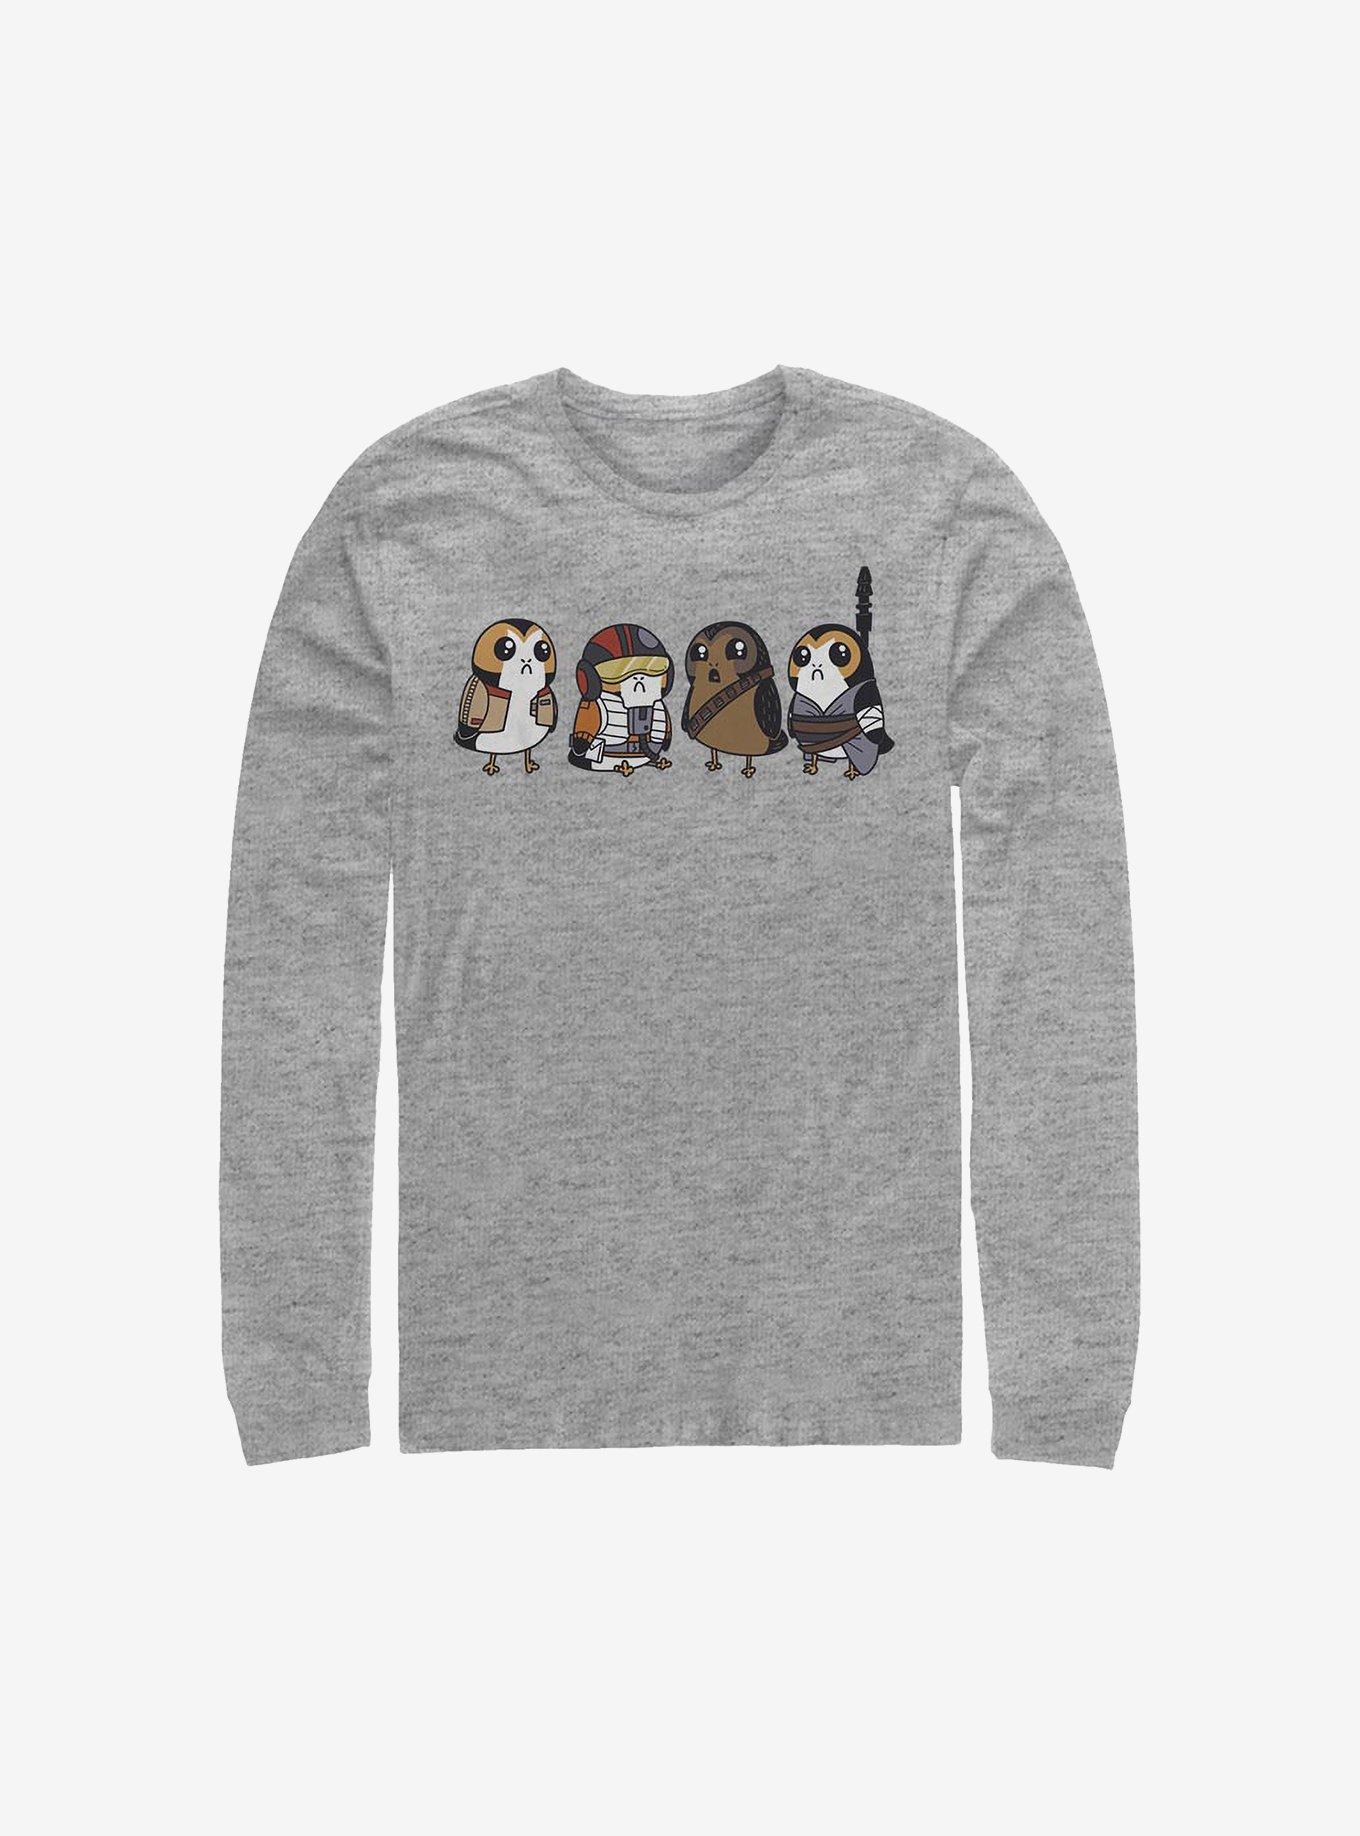 Star Wars: The Last Jedi Porgs As Characters Long-Sleeve T-Shirt